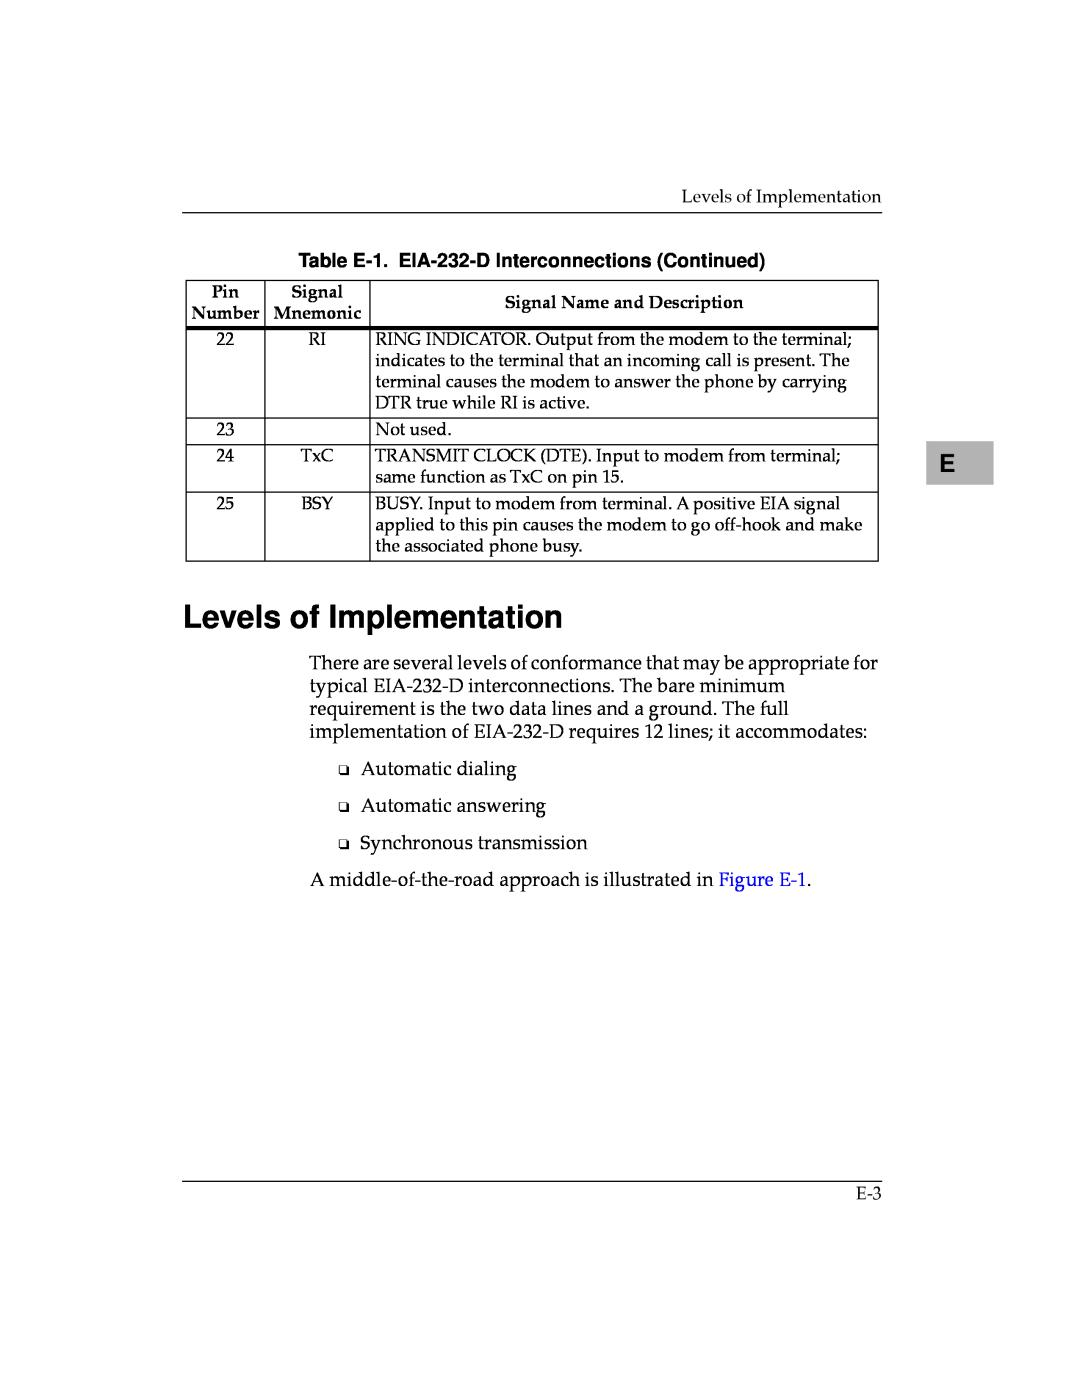 Motorola MVME187 manual Levels of Implementation, Table E-1. EIA-232-D Interconnections Continued 